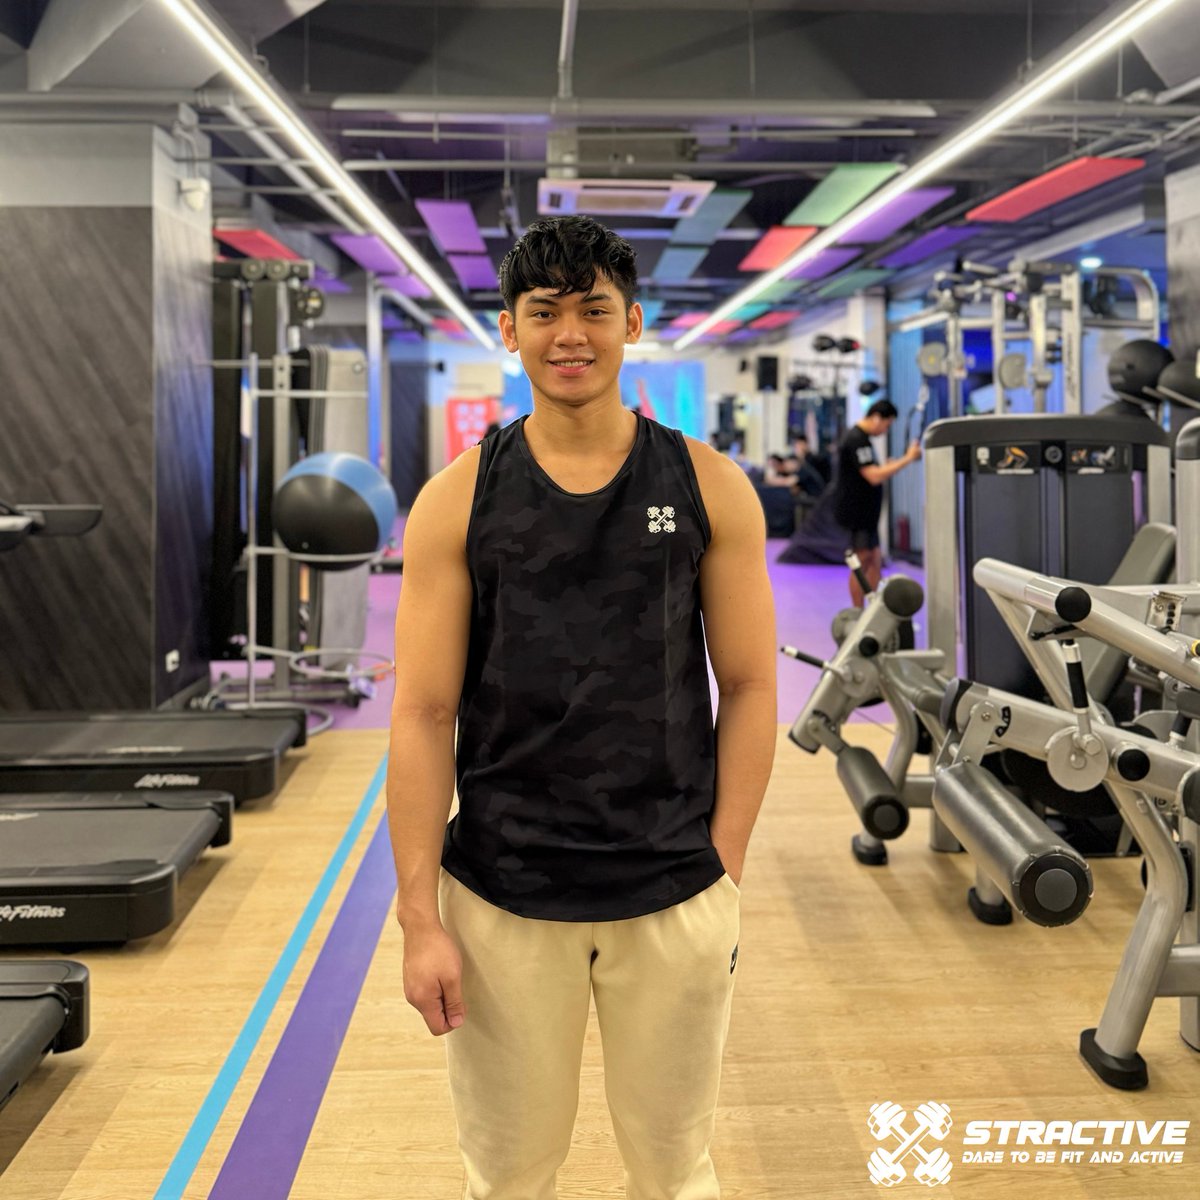 Experience unmatched comfort and style with Amani Hector wearing our Stractive®  Flexi-Active™ Premium Tank-Top - the epitome of effortless sophistication. 

#FitnessPH
#GymLifePH
#FitPinoy
#PhilippineFitness
#PinoyGains
#StrongerPH
#PinoyFitFam
#FitFilipino
#FitnessManila